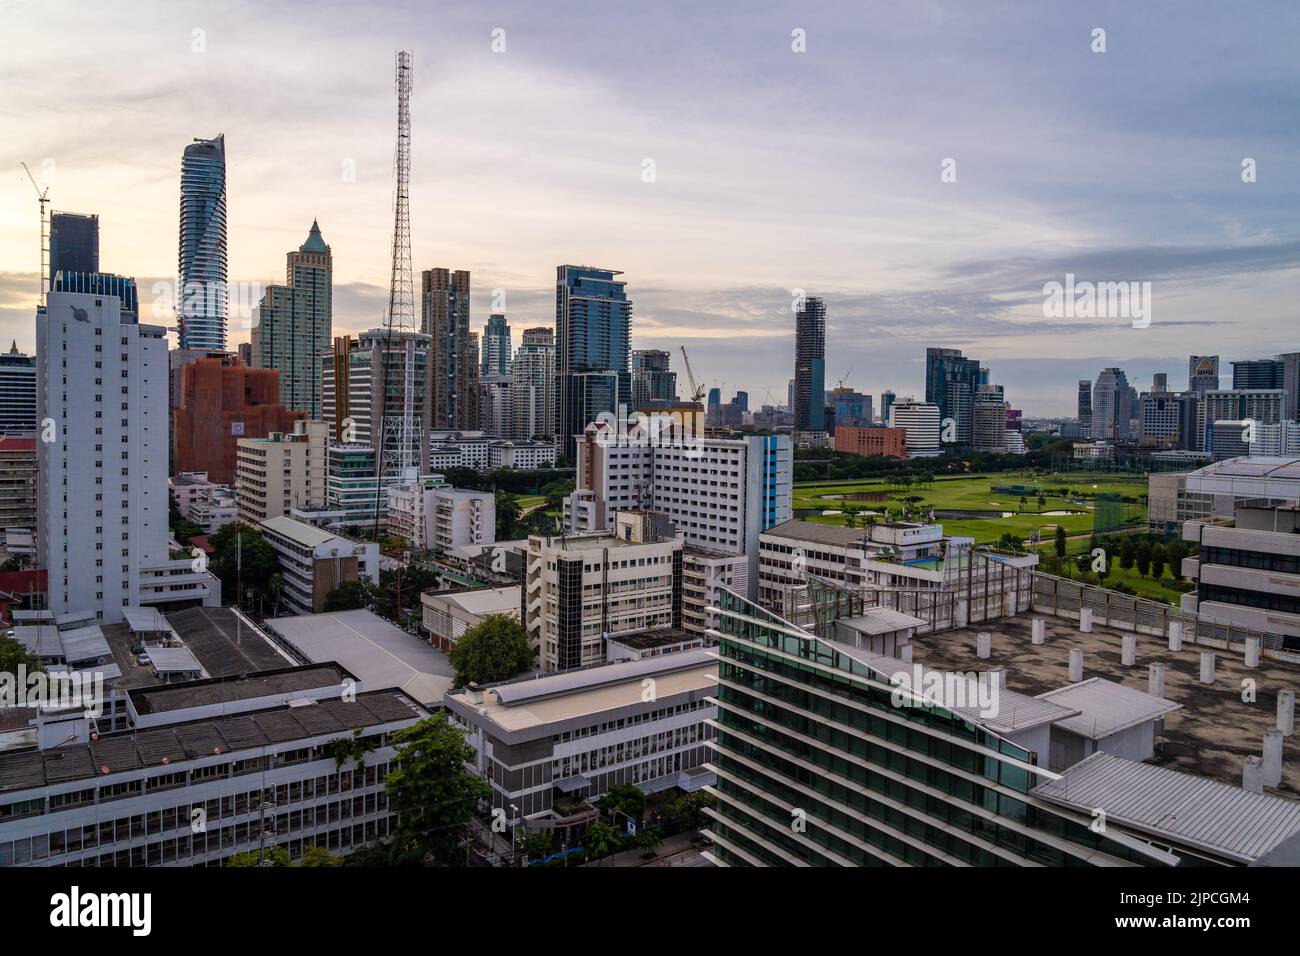 Bangkok, Thailand - 11 August 2022 - Aerial view of Bangkok cityscape in the morning before sunrise showing high-rises and cloudy blue sky Stock Photo